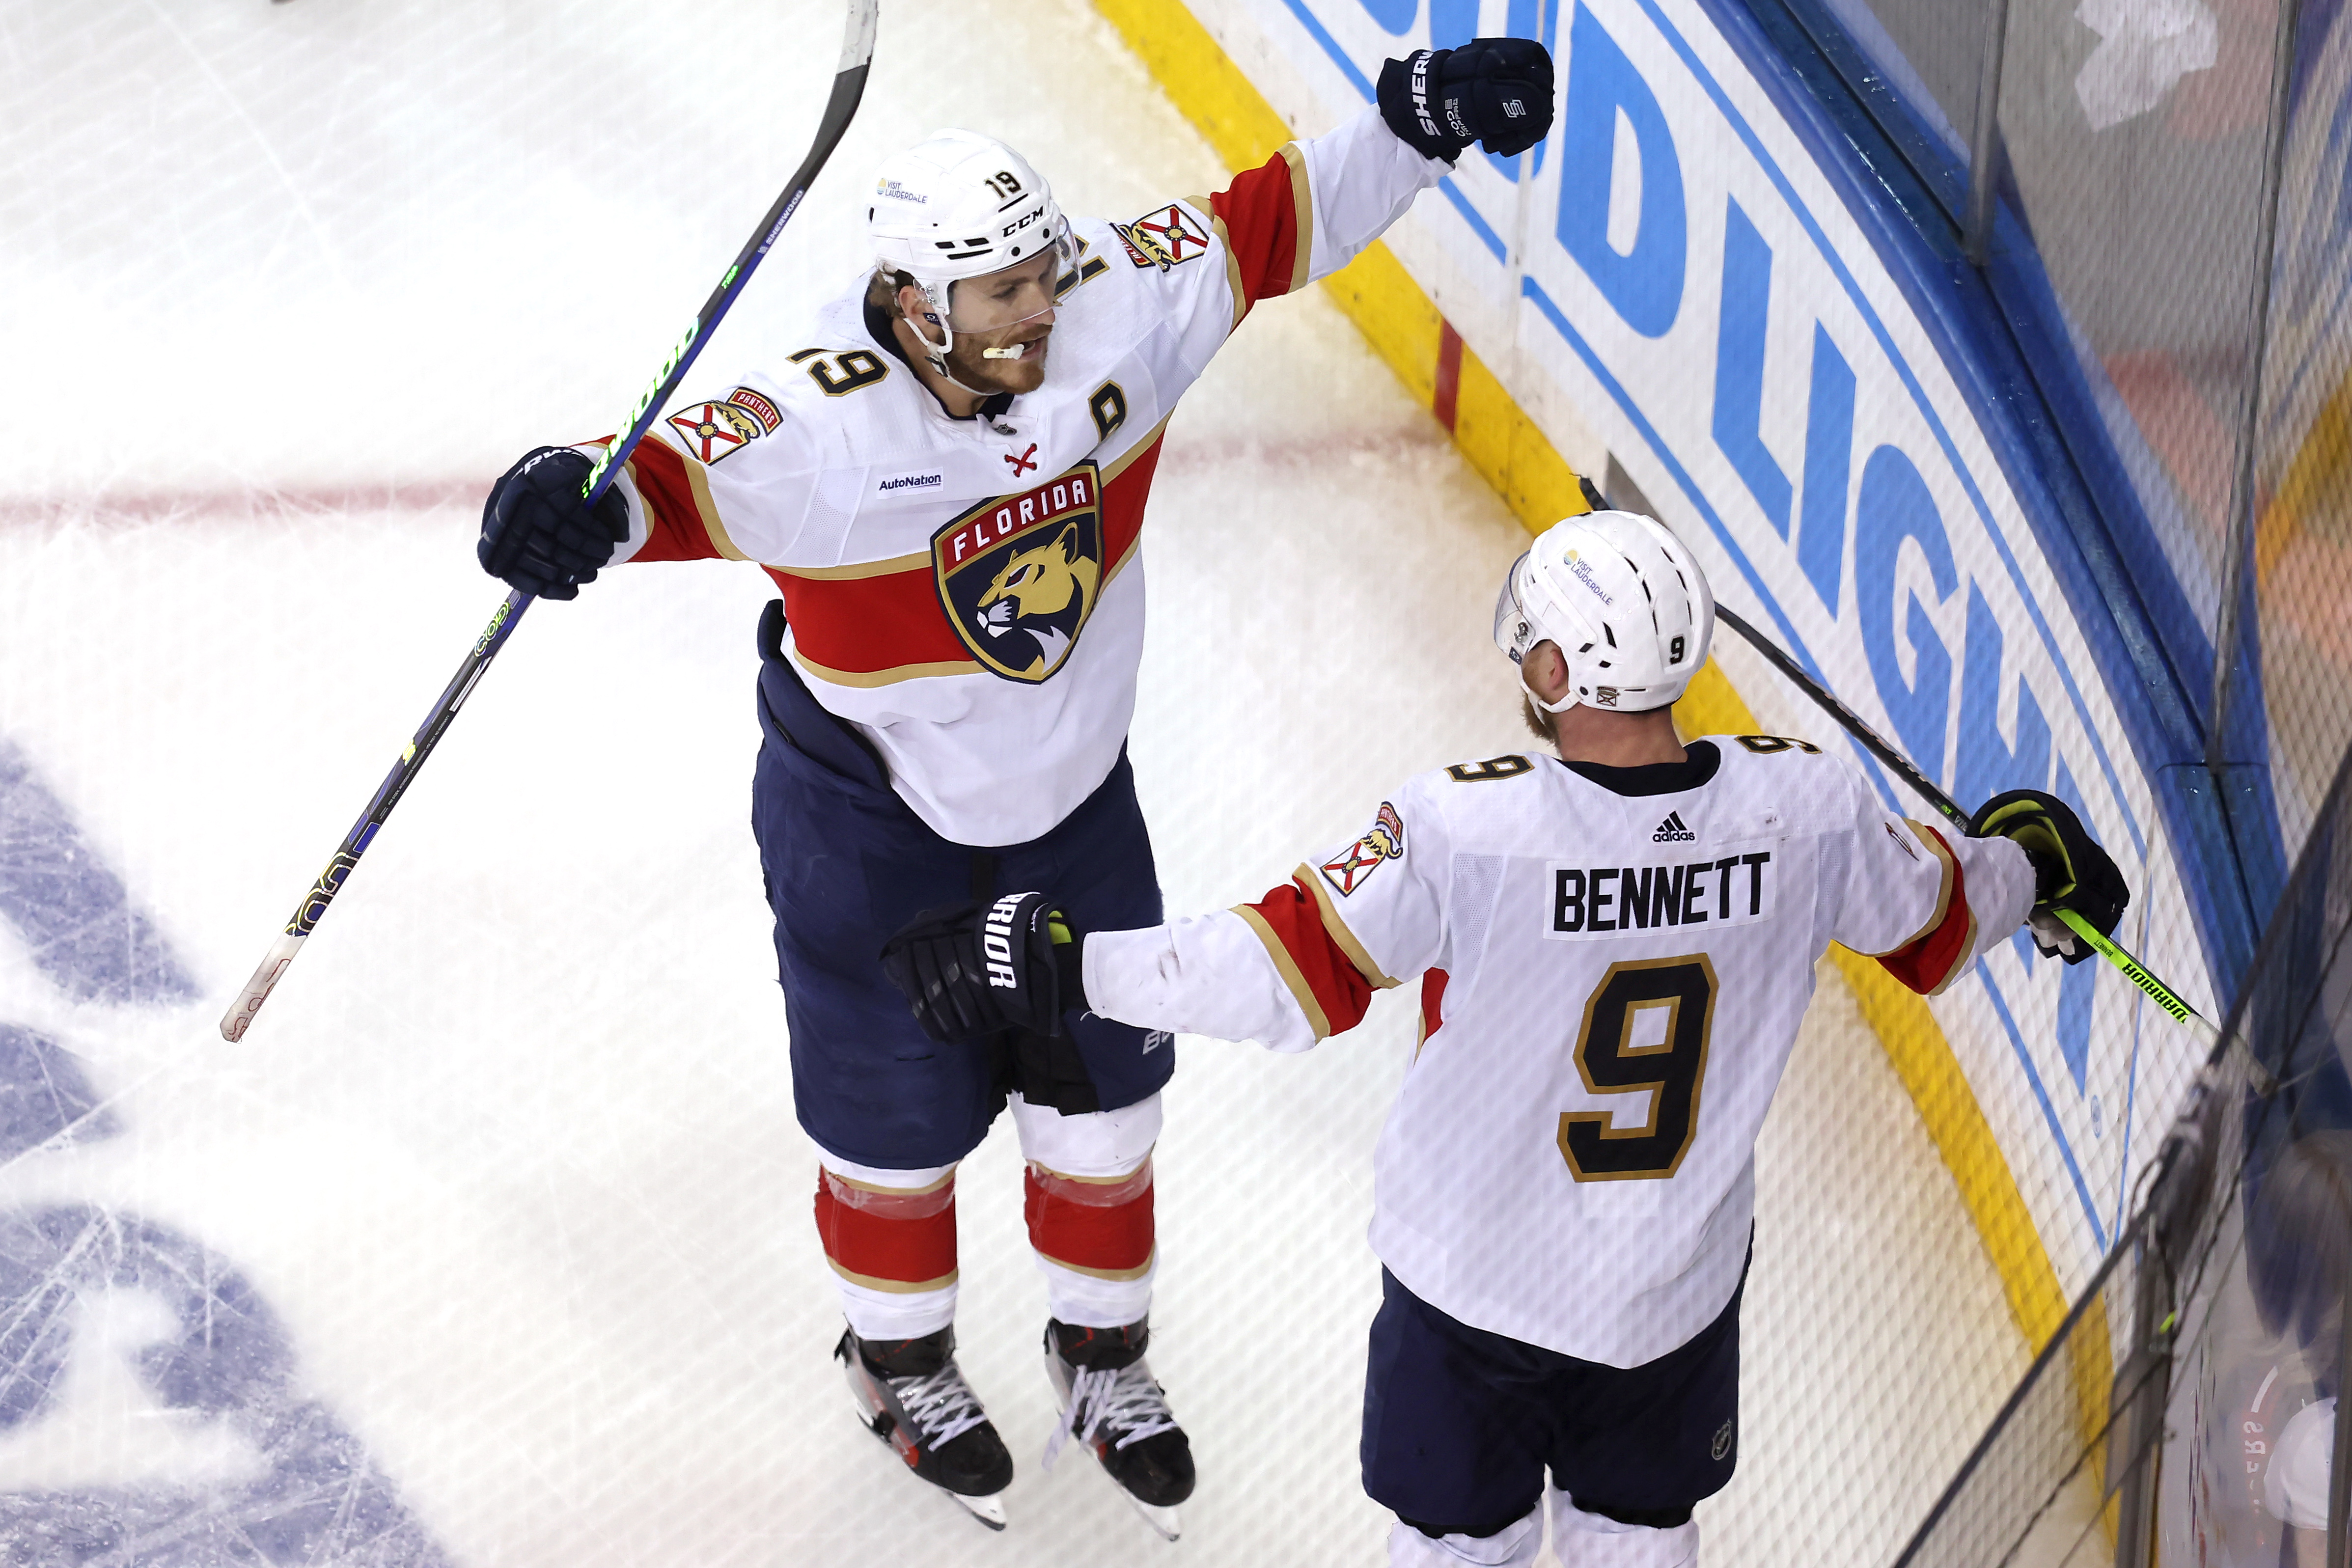 NHL: Stanley Cup Playoffs-Florida Panthers at New York Rangers